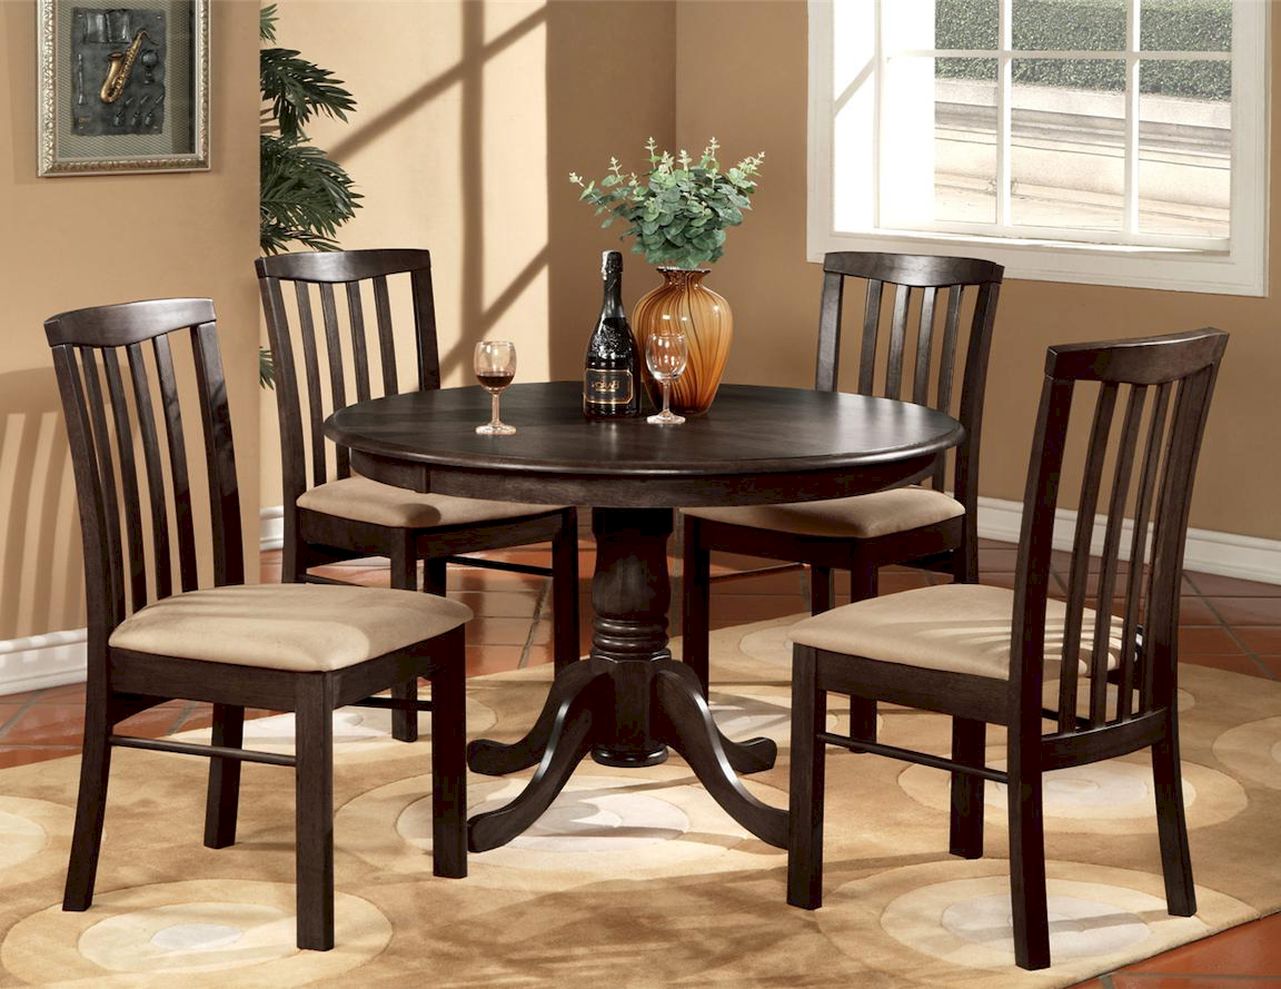 Round Kitchen Table And Chairs photo - 3